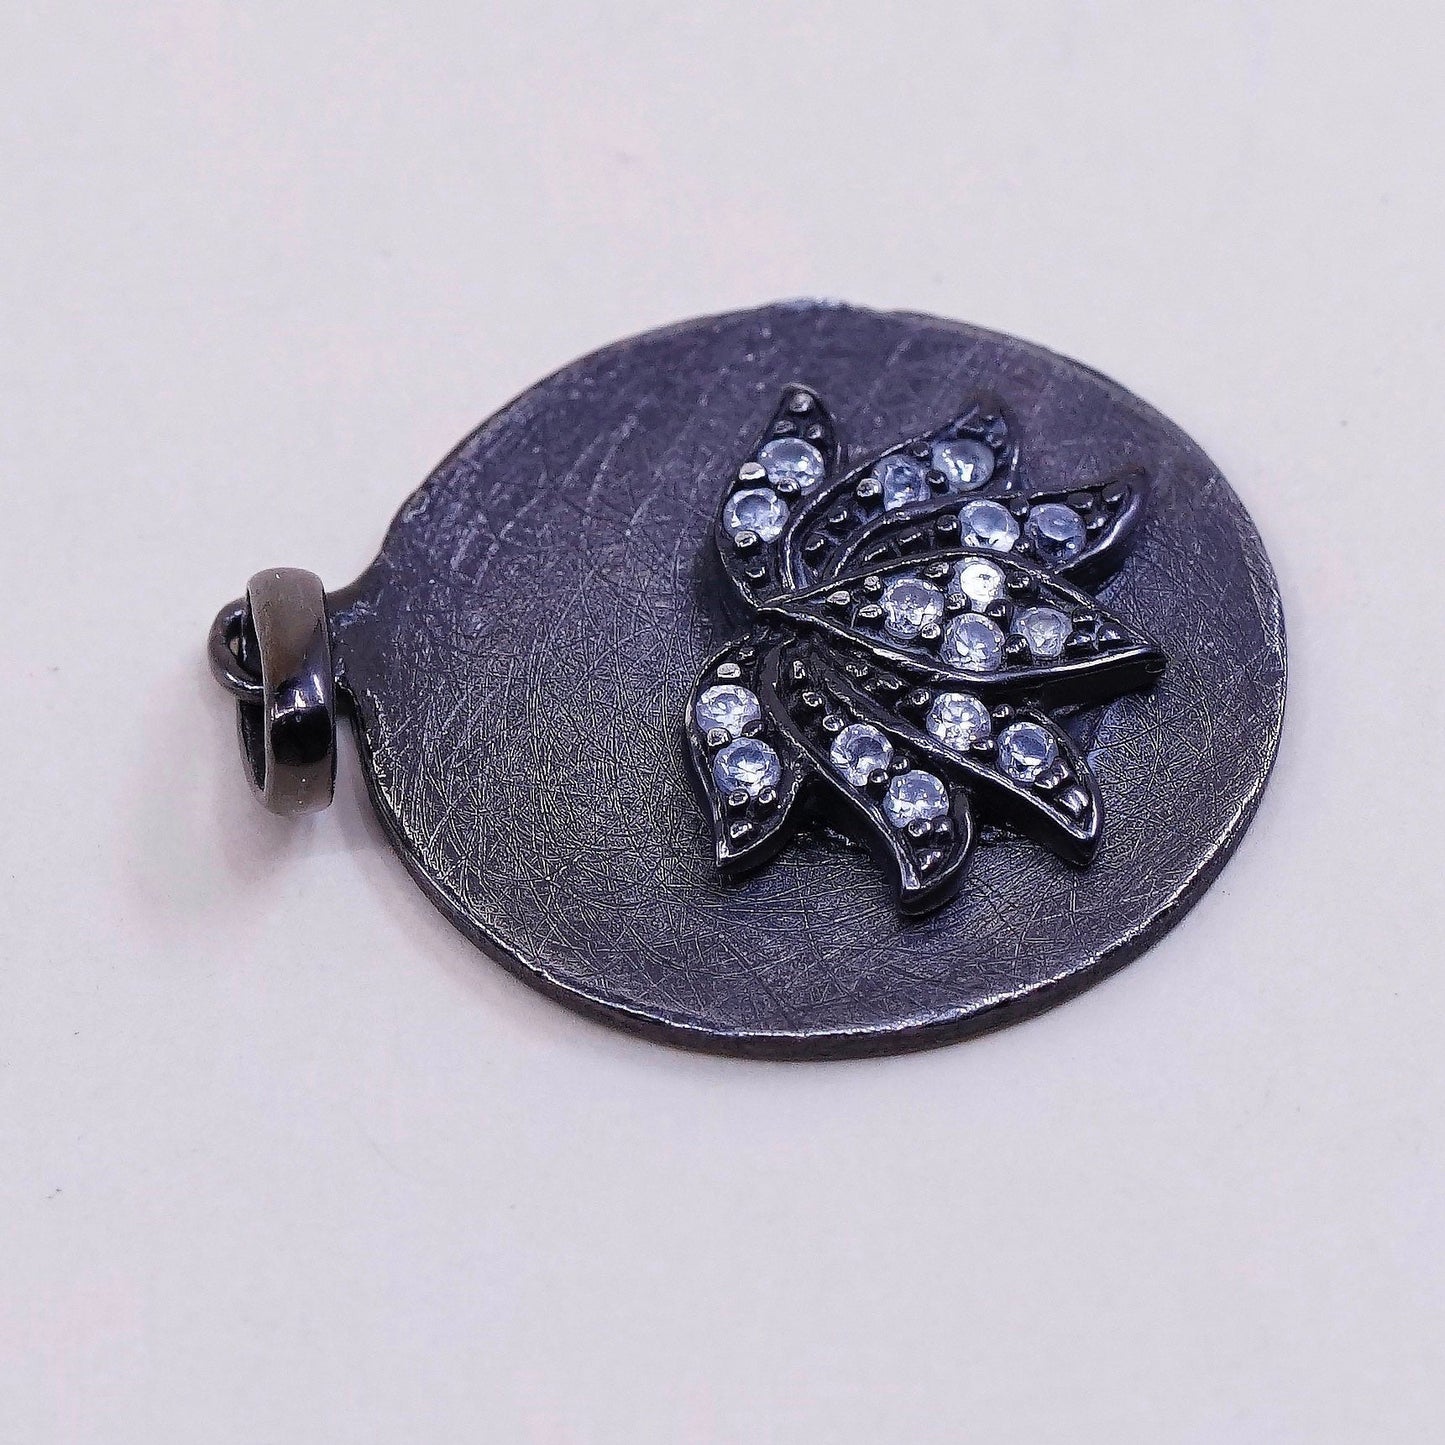 Vintage sterling silver handmade pendant, 925 tag charm with flower Cz